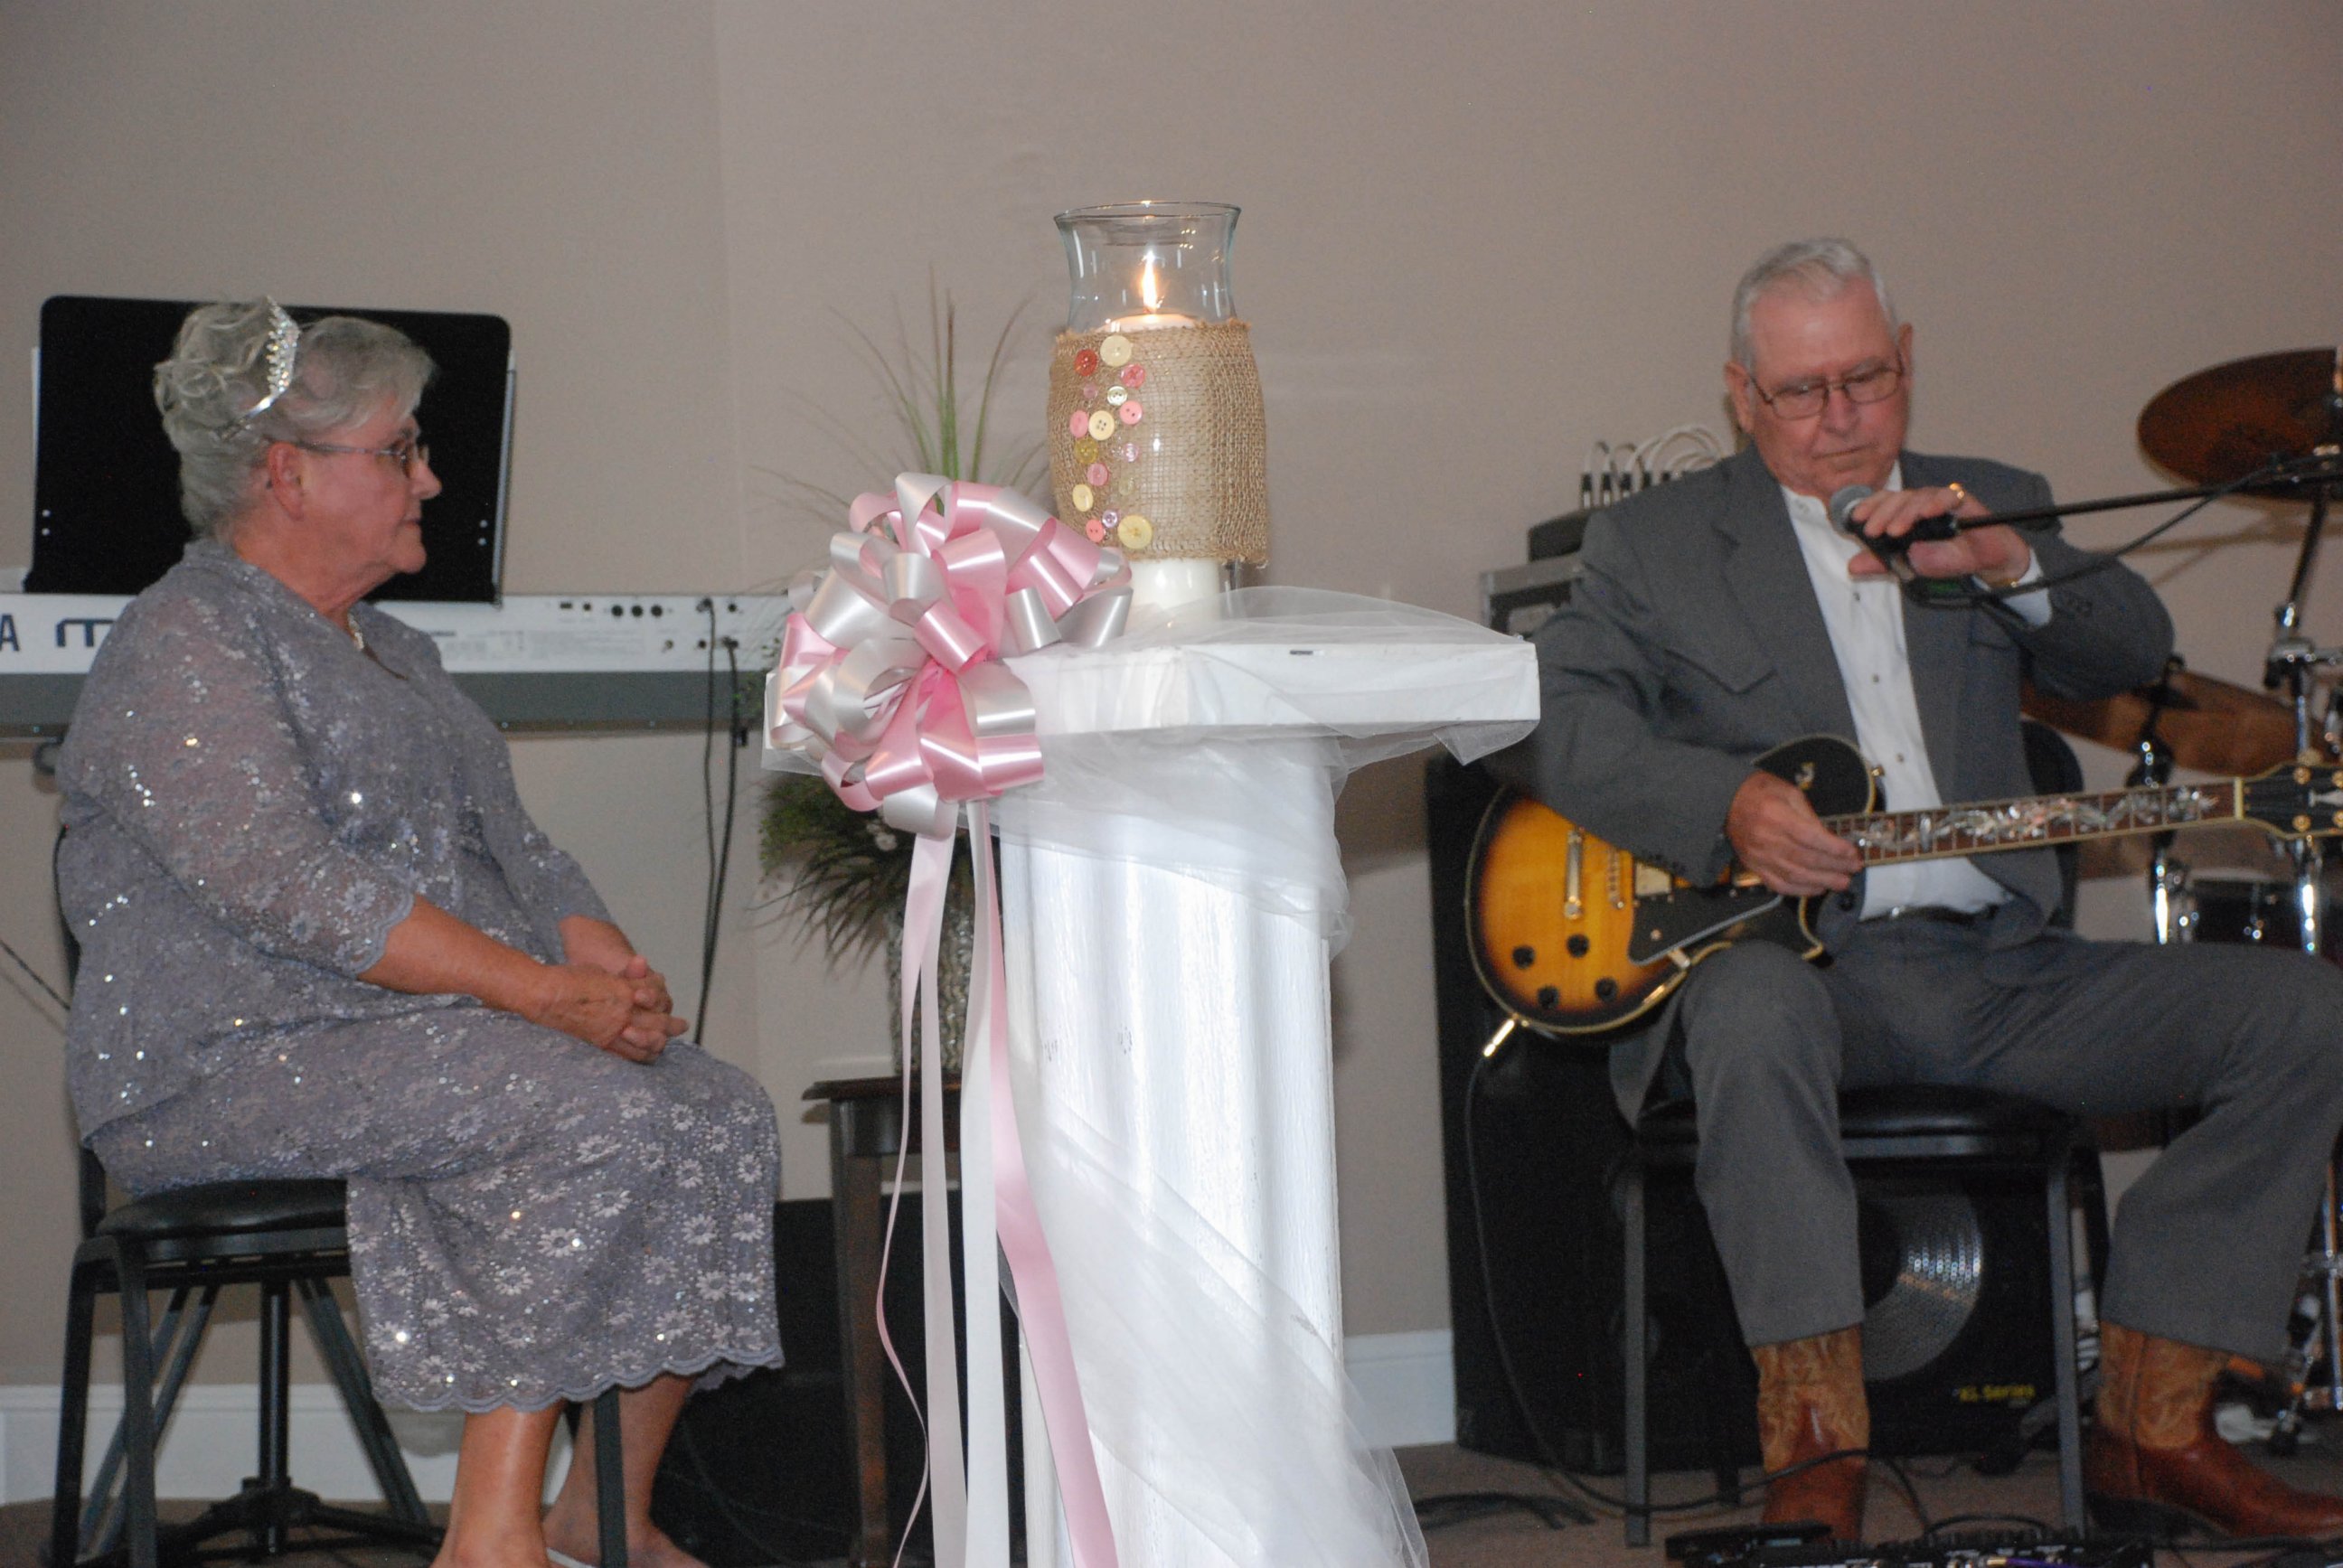 PHOTO: The wedding was a country affair, where Johnny wore boots and played the guitar while guests enjoyed barbecue.